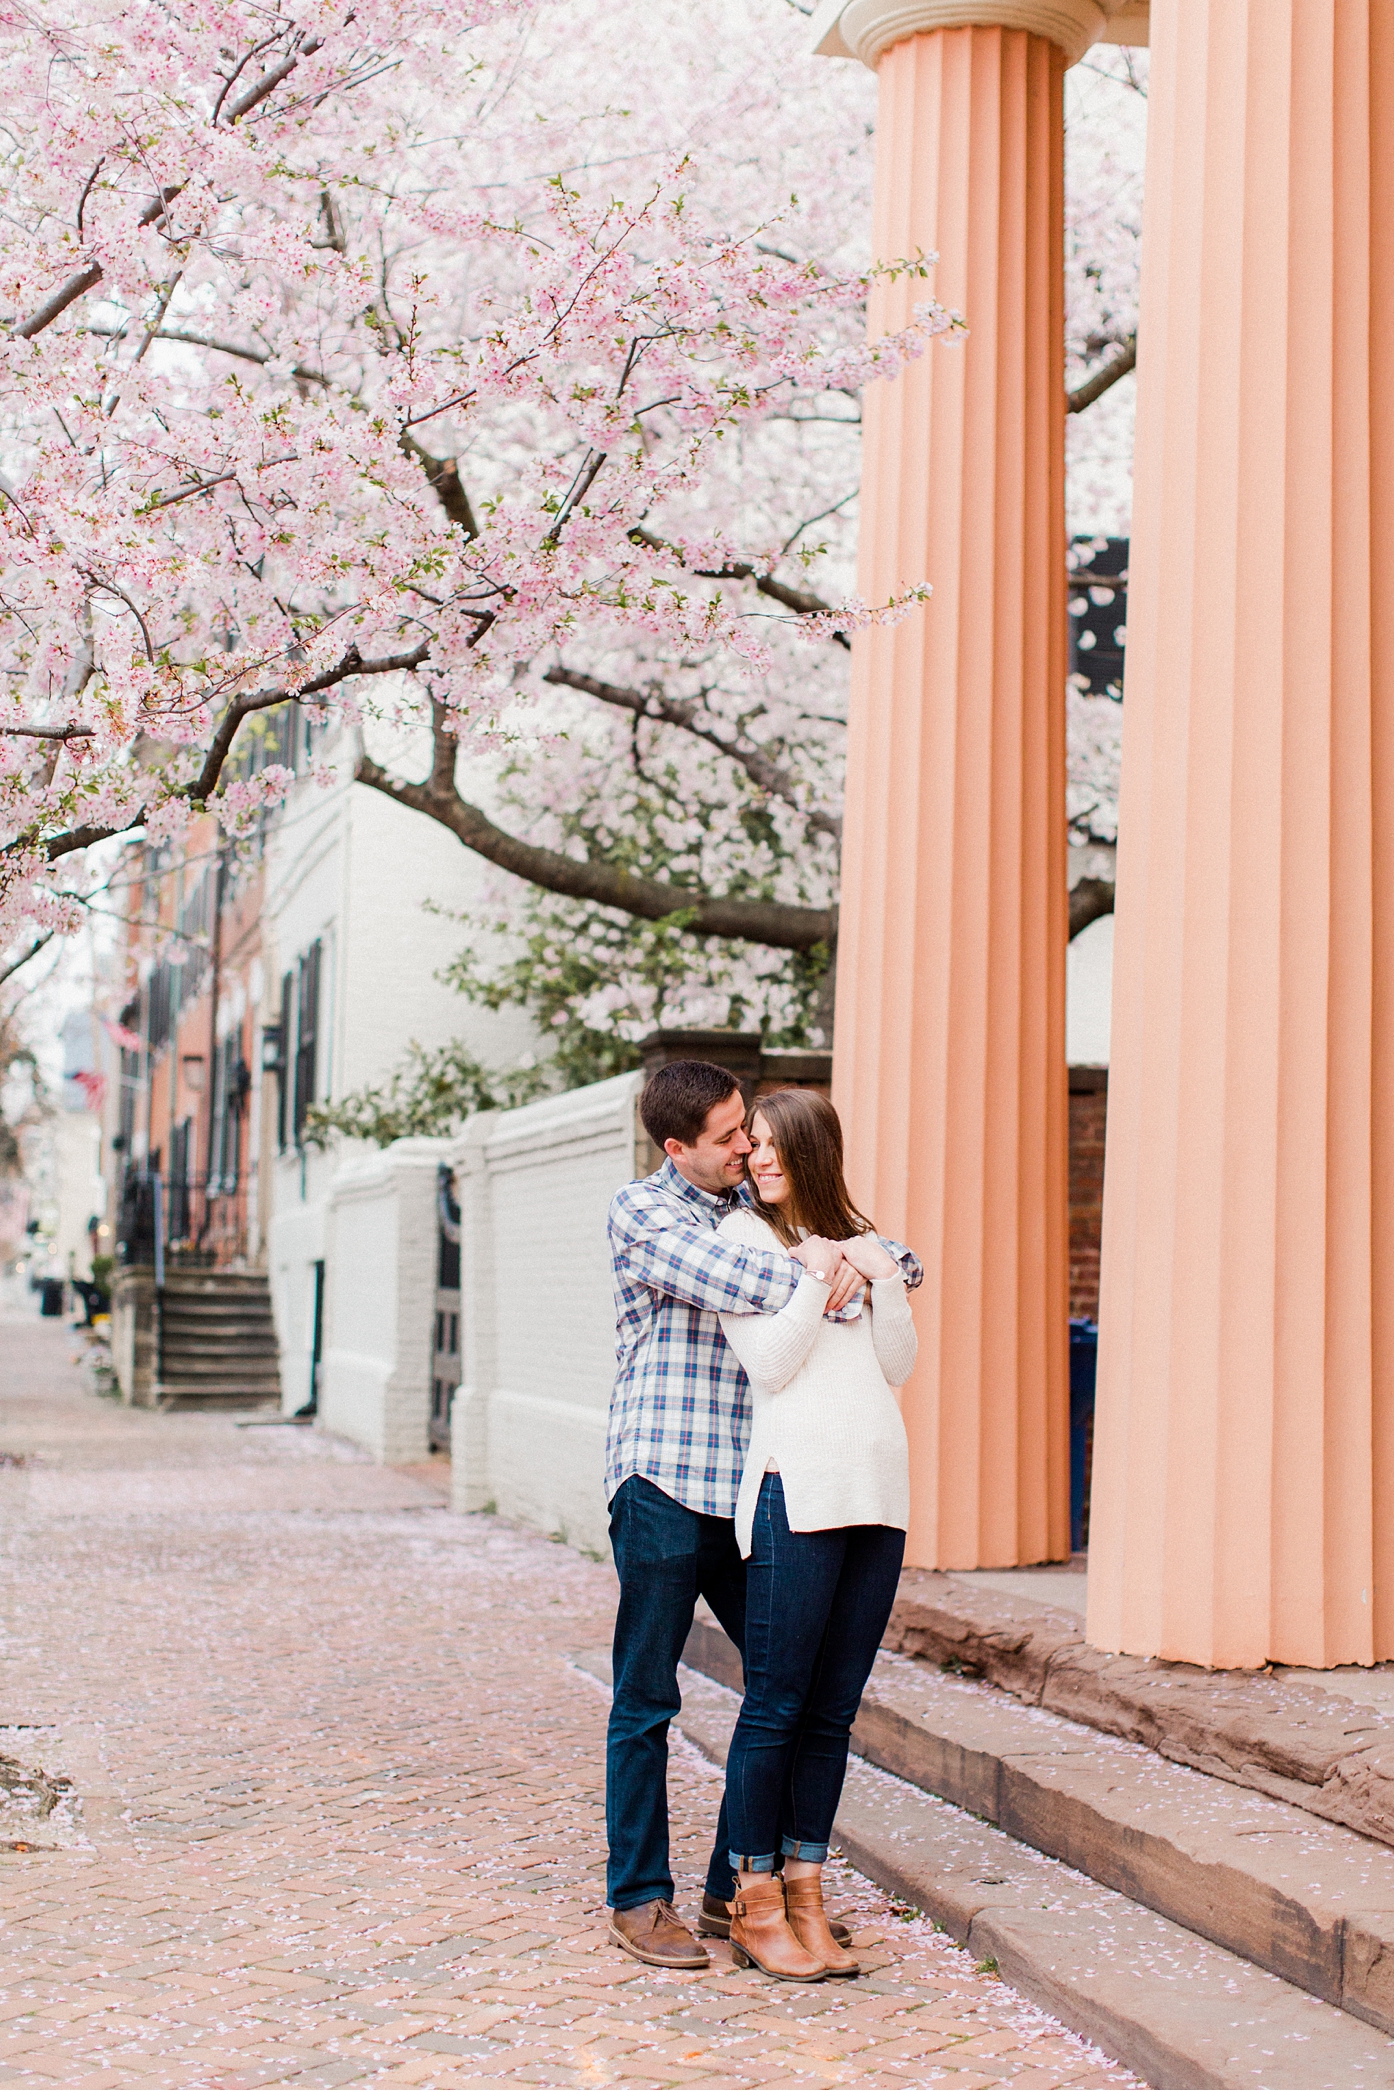 Sunrise Session in Old Town Alexandria by Alisandra Photography